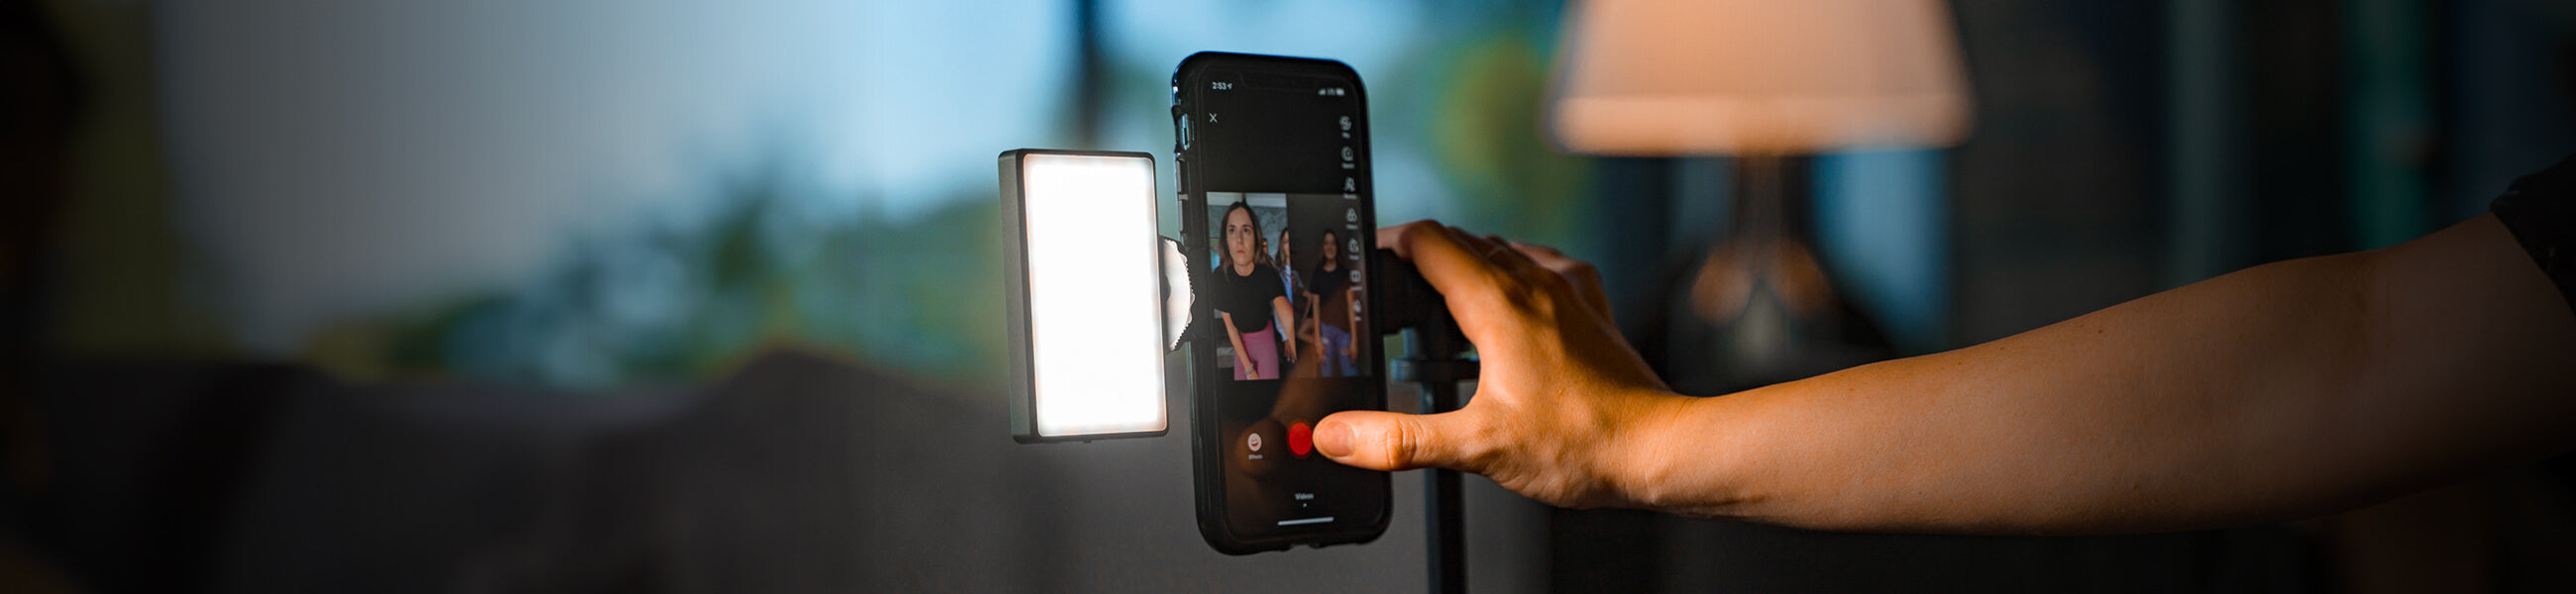 smartphone lighting for phone photography and video